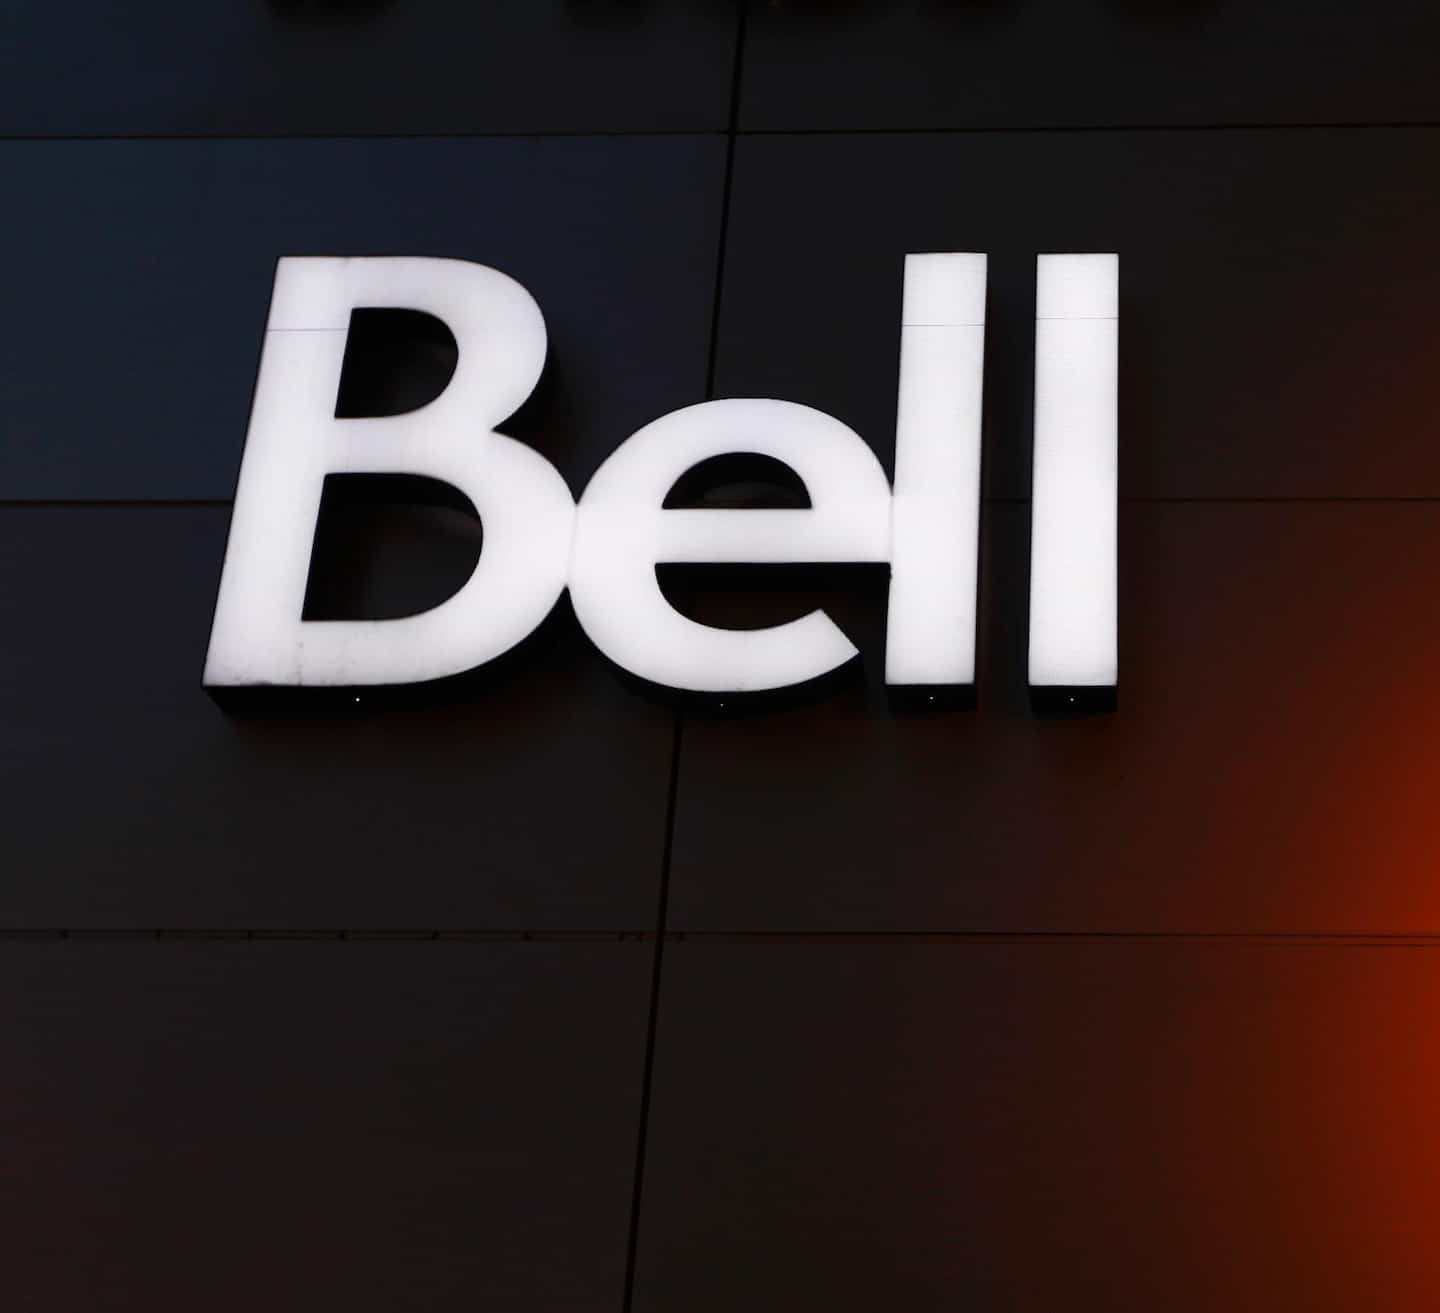 The “Bell FIBE” trademark challenged before the Federal Court of Canada